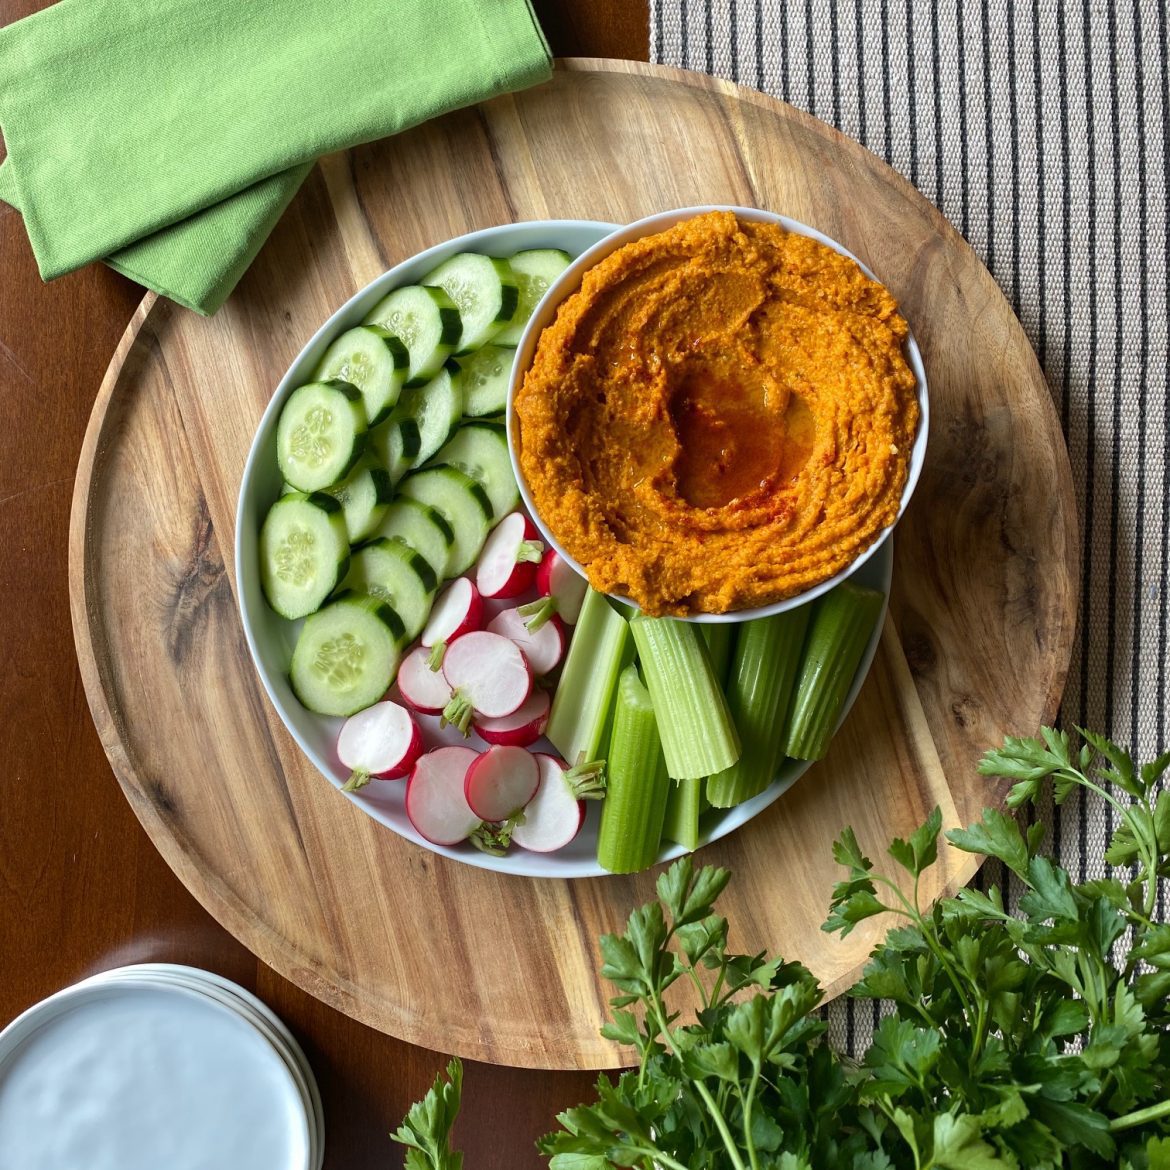 Reed’s Recipes: Roasted Carrot Dip